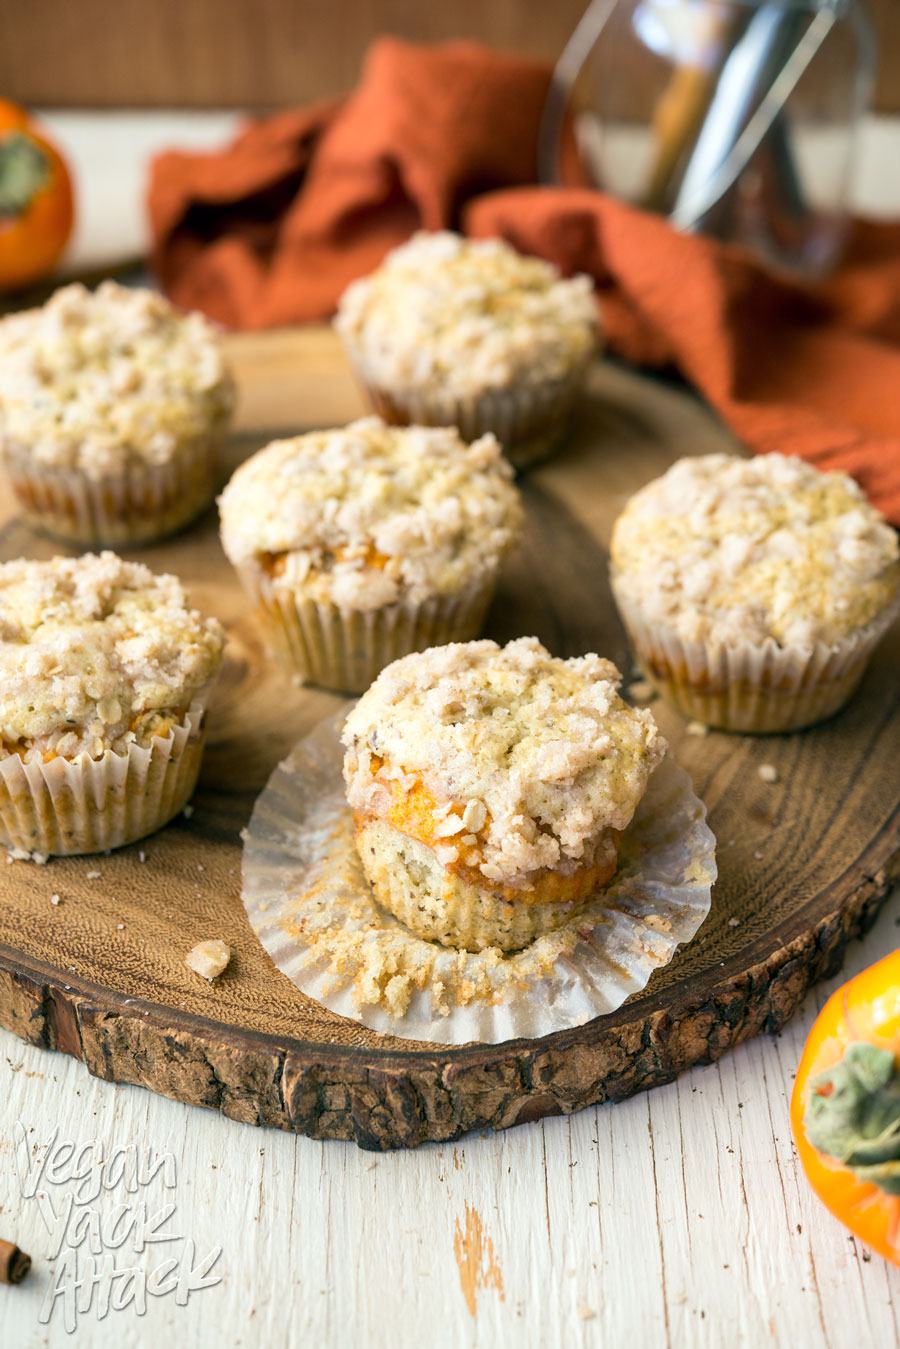 Looking for persimmon recipes? Look no further! These Mini Persimmon Coffee Cakes are quite the treat! #vegan #soyfree @VeganYackAttack